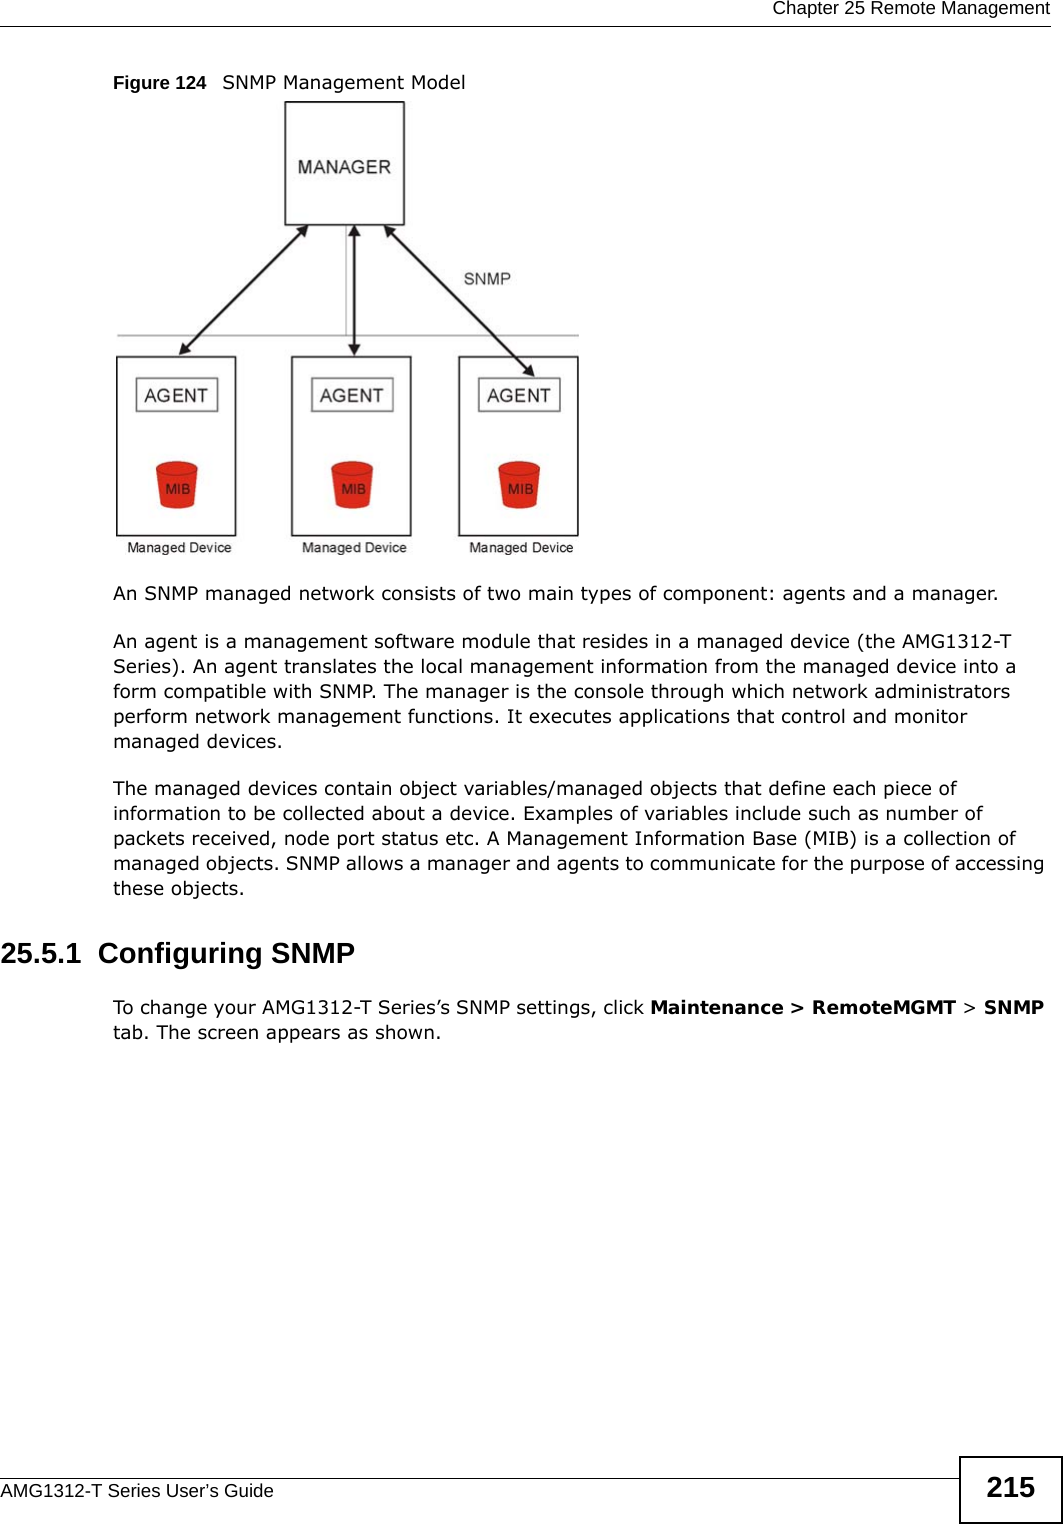  Chapter 25 Remote ManagementAMG1312-T Series User’s Guide 215Figure 124   SNMP Management ModelAn SNMP managed network consists of two main types of component: agents and a manager. An agent is a management software module that resides in a managed device (the AMG1312-T Series). An agent translates the local management information from the managed device into a form compatible with SNMP. The manager is the console through which network administrators perform network management functions. It executes applications that control and monitor managed devices. The managed devices contain object variables/managed objects that define each piece of information to be collected about a device. Examples of variables include such as number of packets received, node port status etc. A Management Information Base (MIB) is a collection of managed objects. SNMP allows a manager and agents to communicate for the purpose of accessing these objects.25.5.1  Configuring SNMP To change your AMG1312-T Series’s SNMP settings, click Maintenance &gt; RemoteMGMT &gt; SNMP tab. The screen appears as shown.